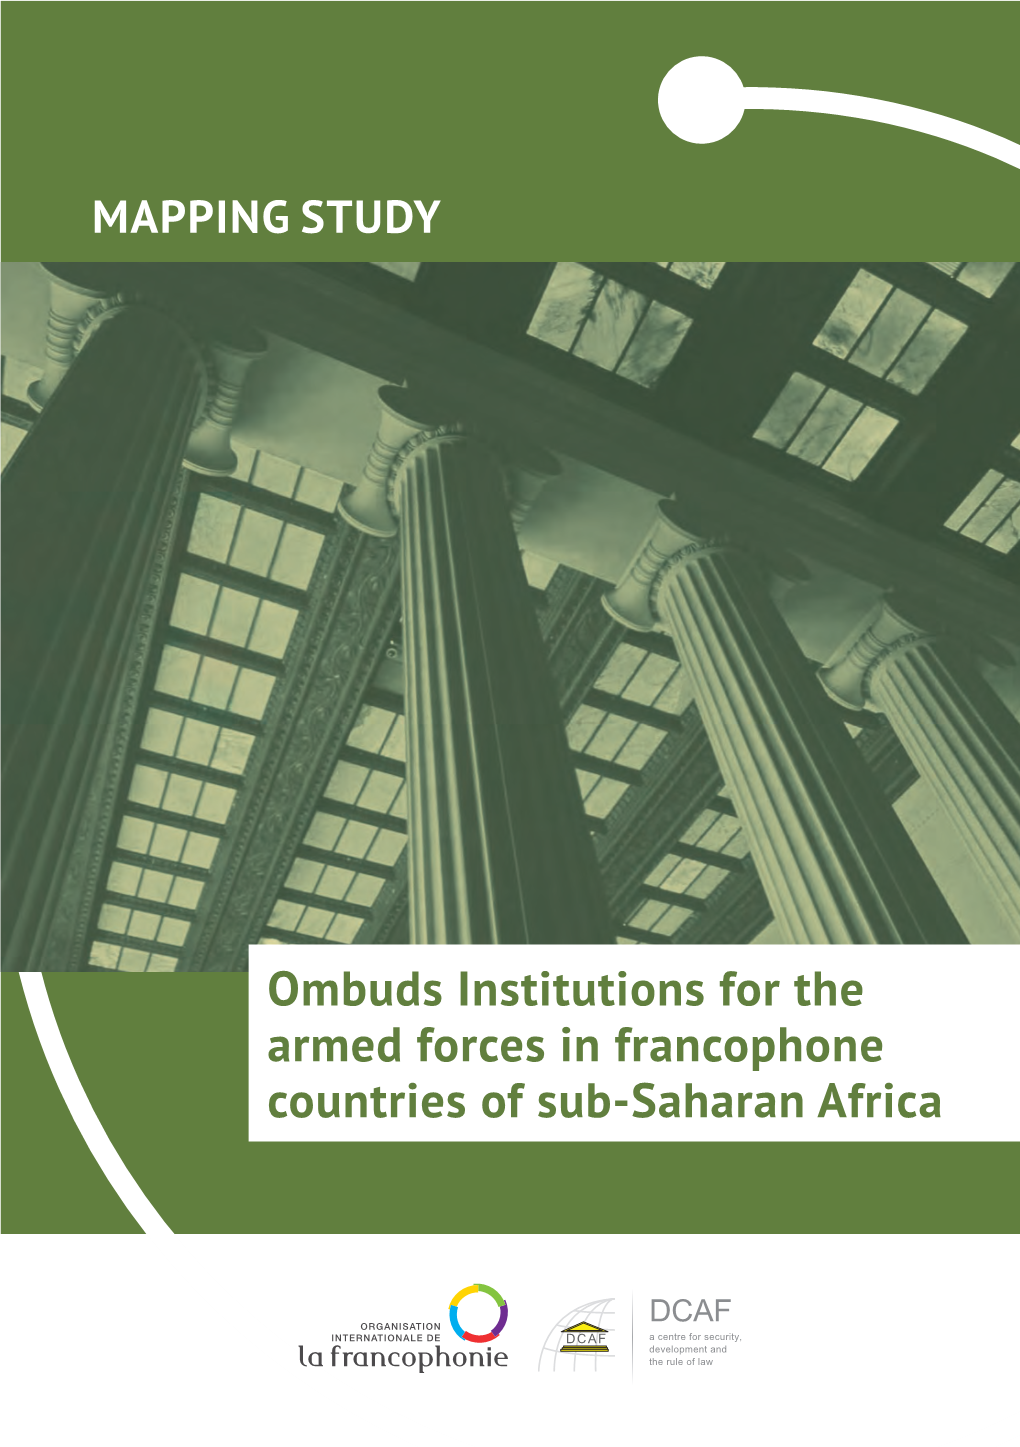 Mapping Study: Ombuds Institutions for the Armed Forces in Francophone Countries of Sub-Saharan Africa